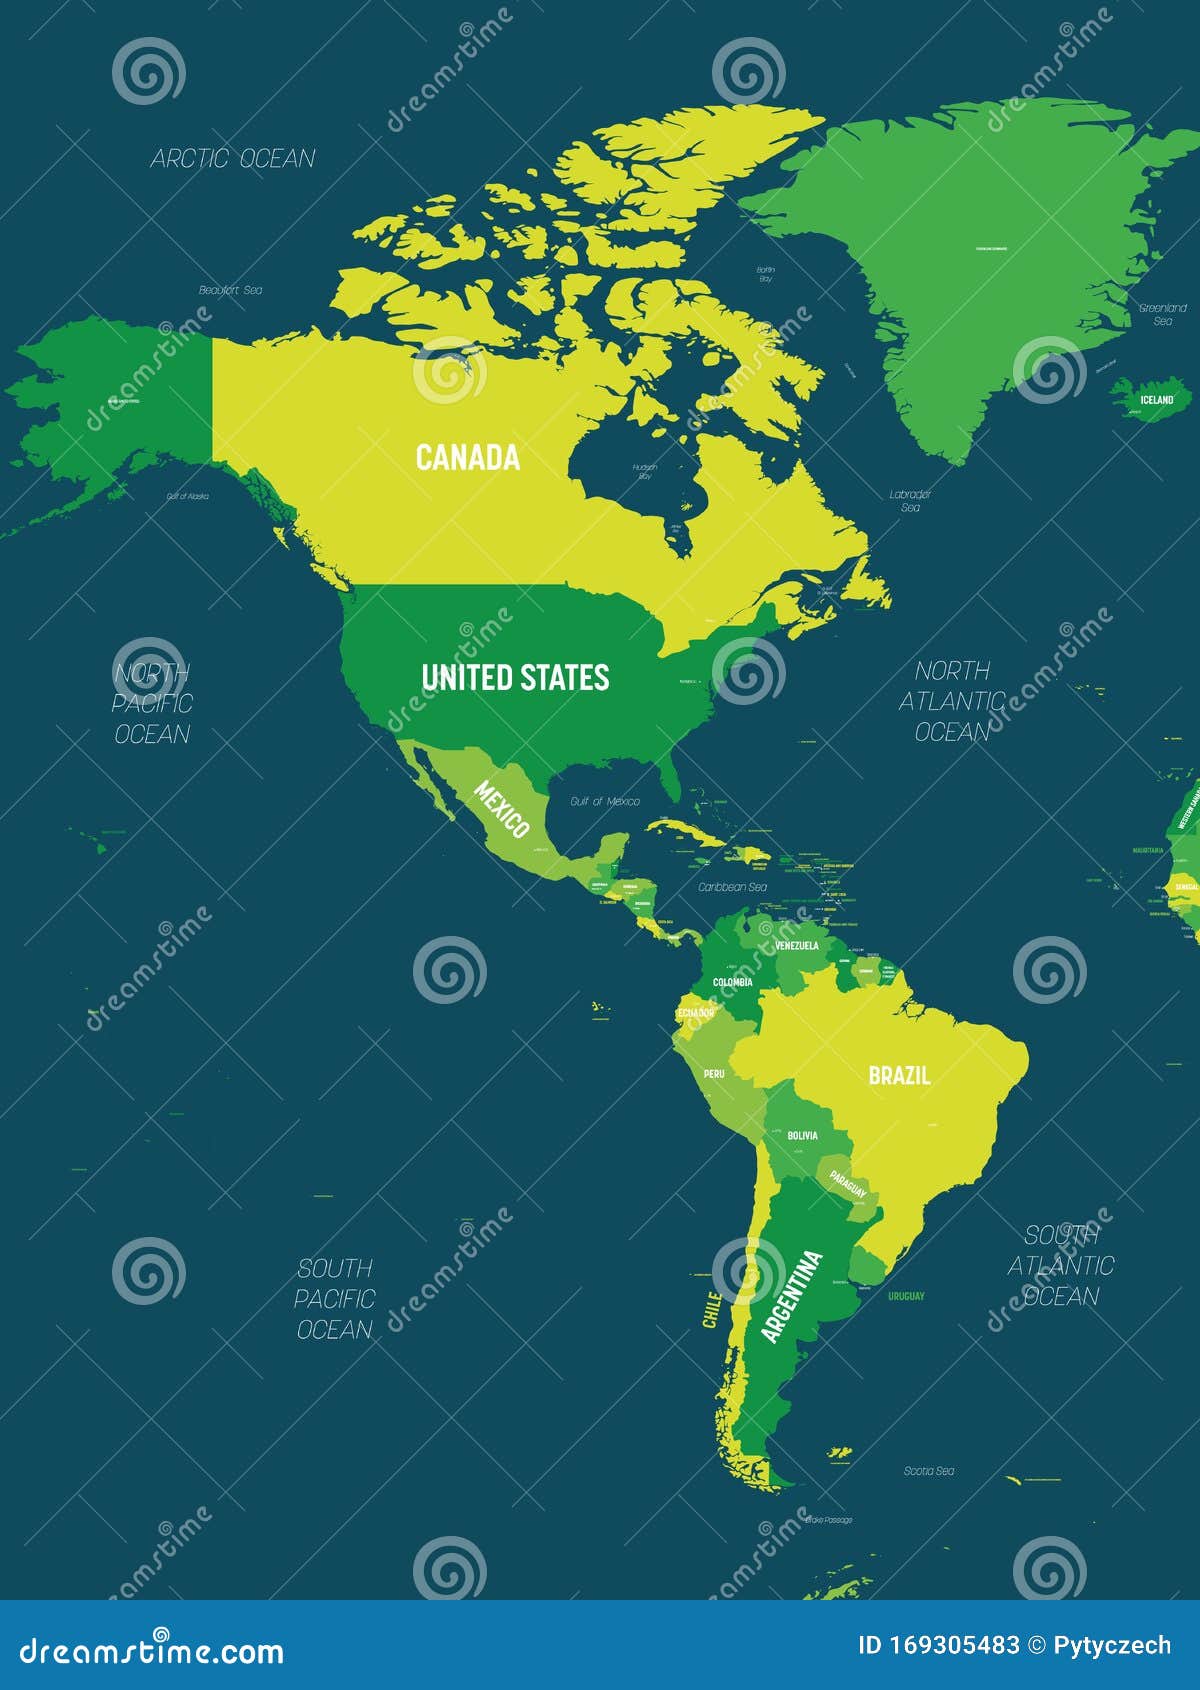 americas-map-high-detailed-political-map-of-north-and-south-america